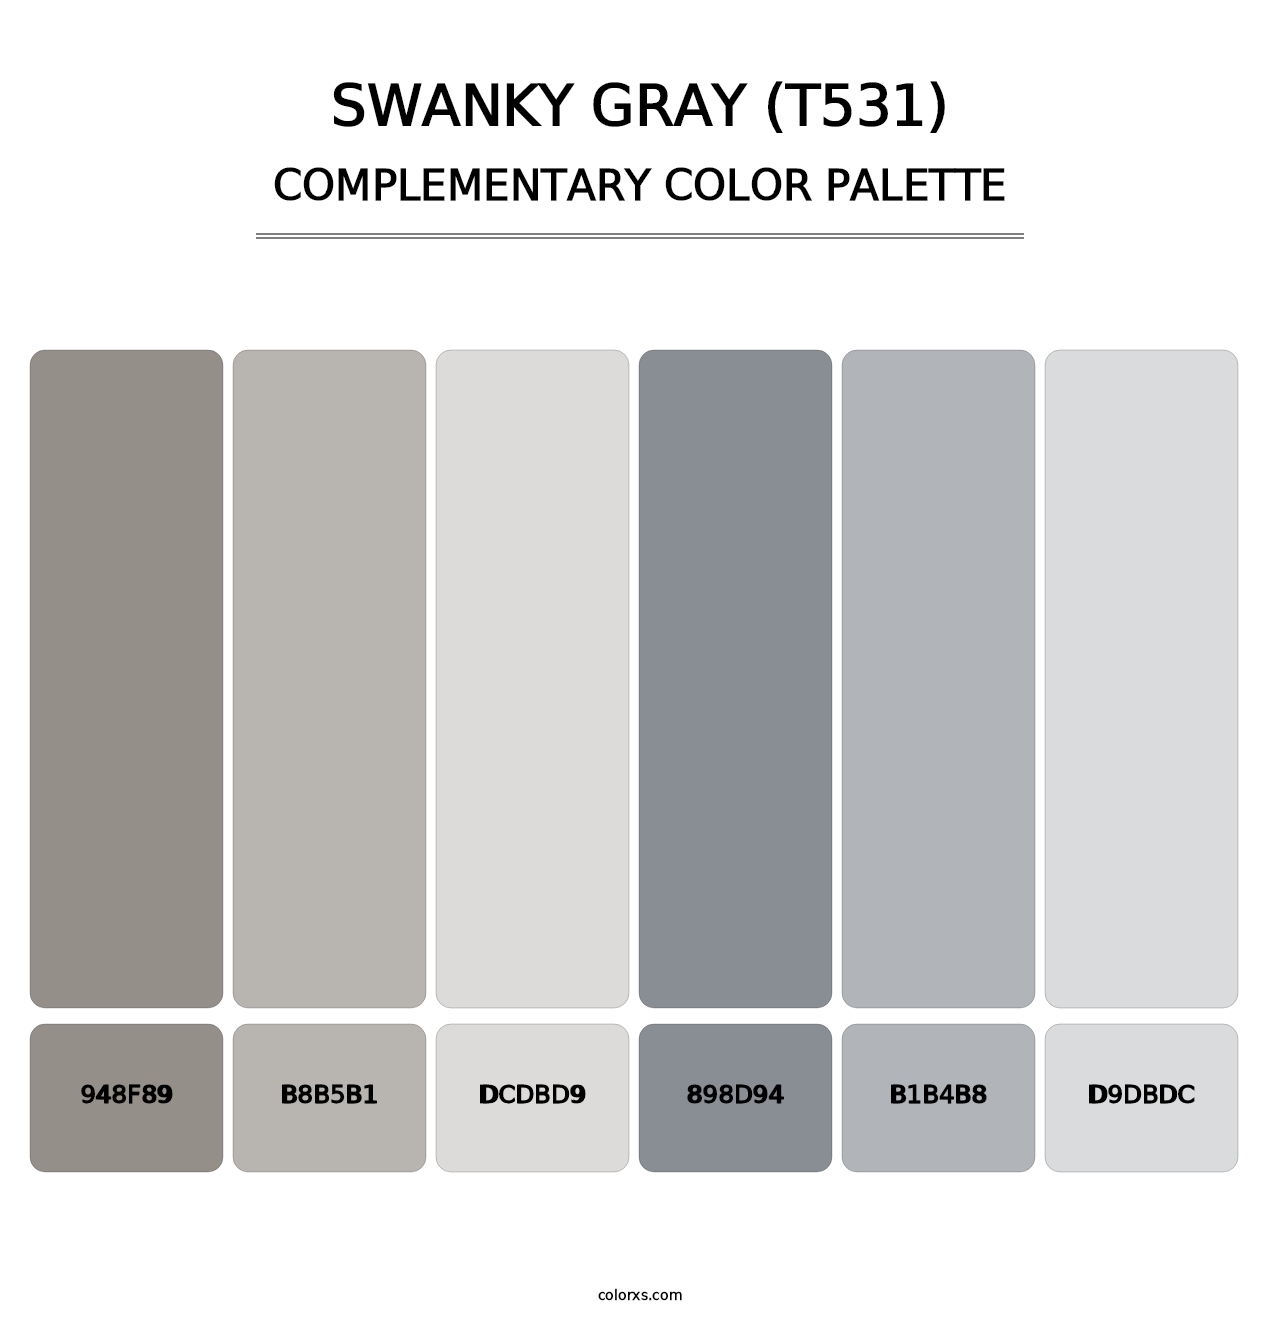 Swanky Gray (T531) - Complementary Color Palette